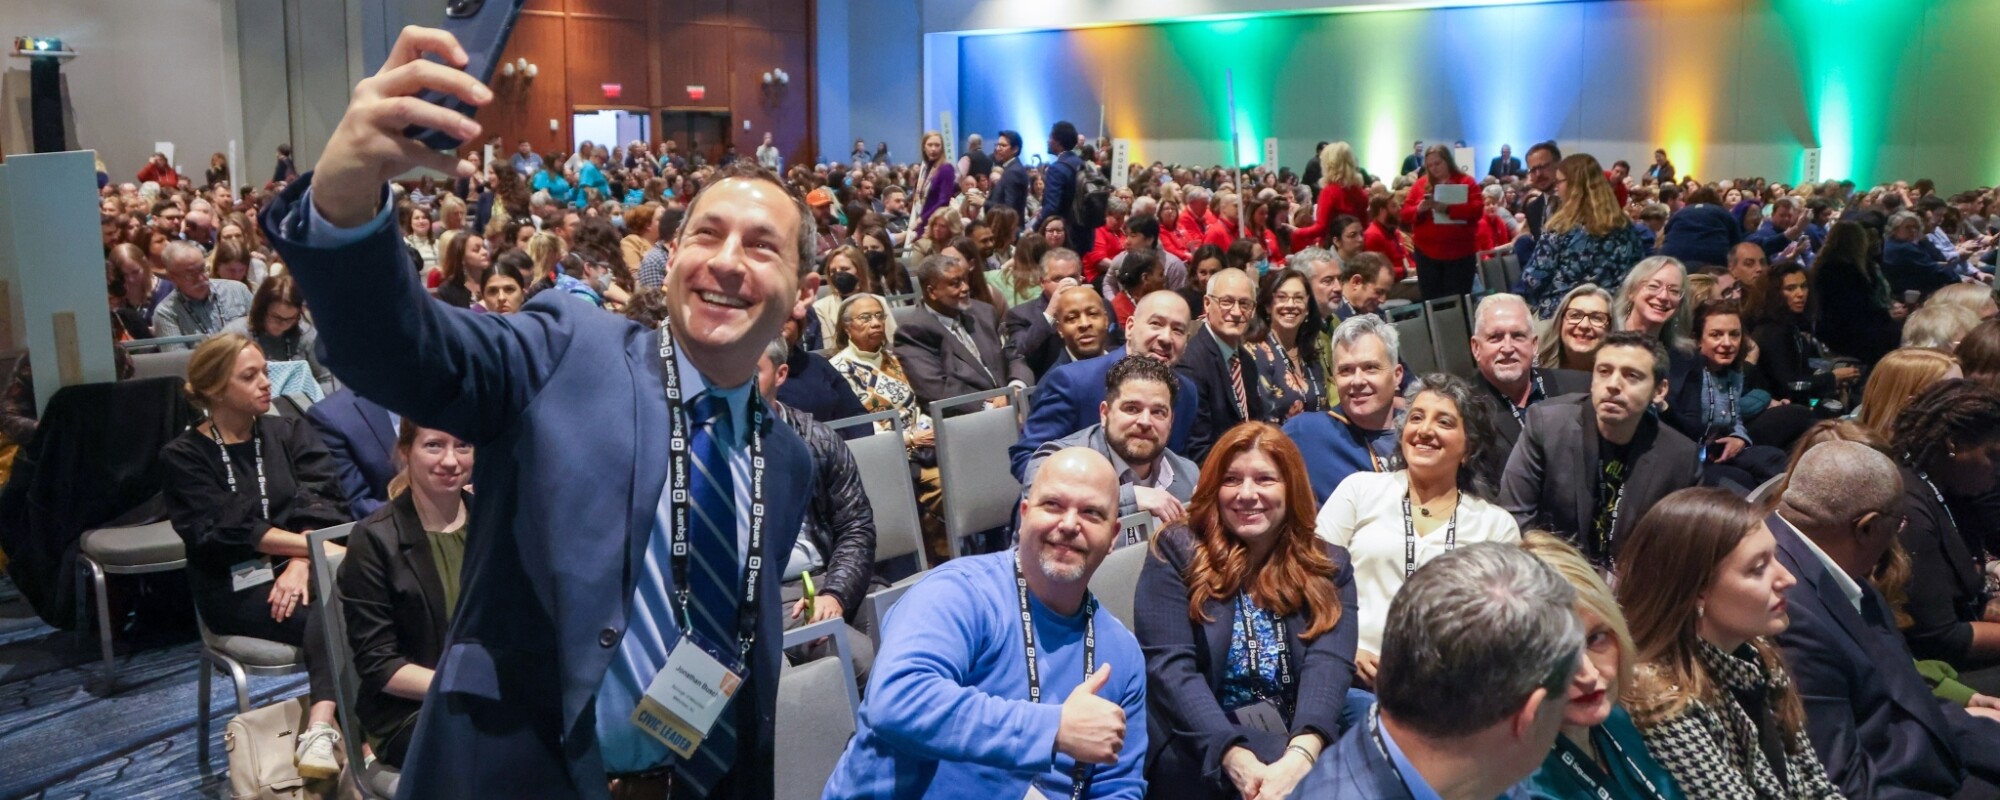 In a large conference ballroom, people find seats while a man takes a selfie with colleagues.